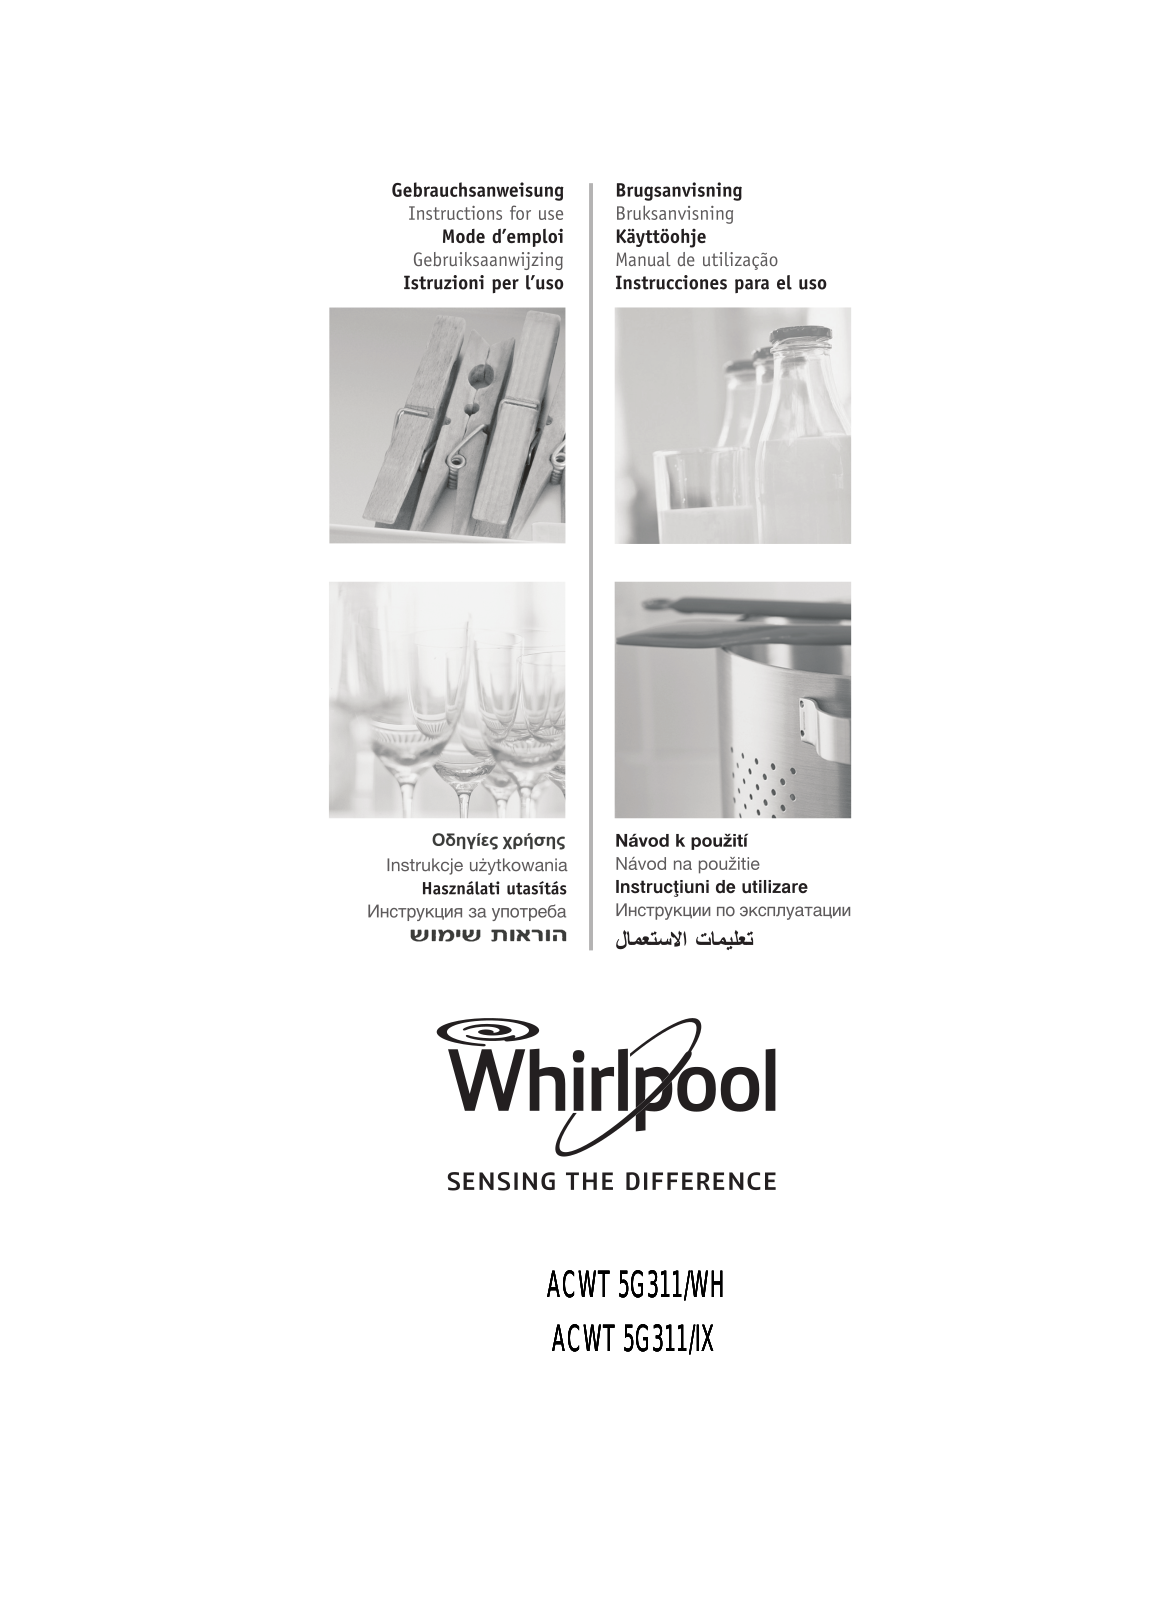 WHIRLPOOL ACWT 5G311/WH User Manual